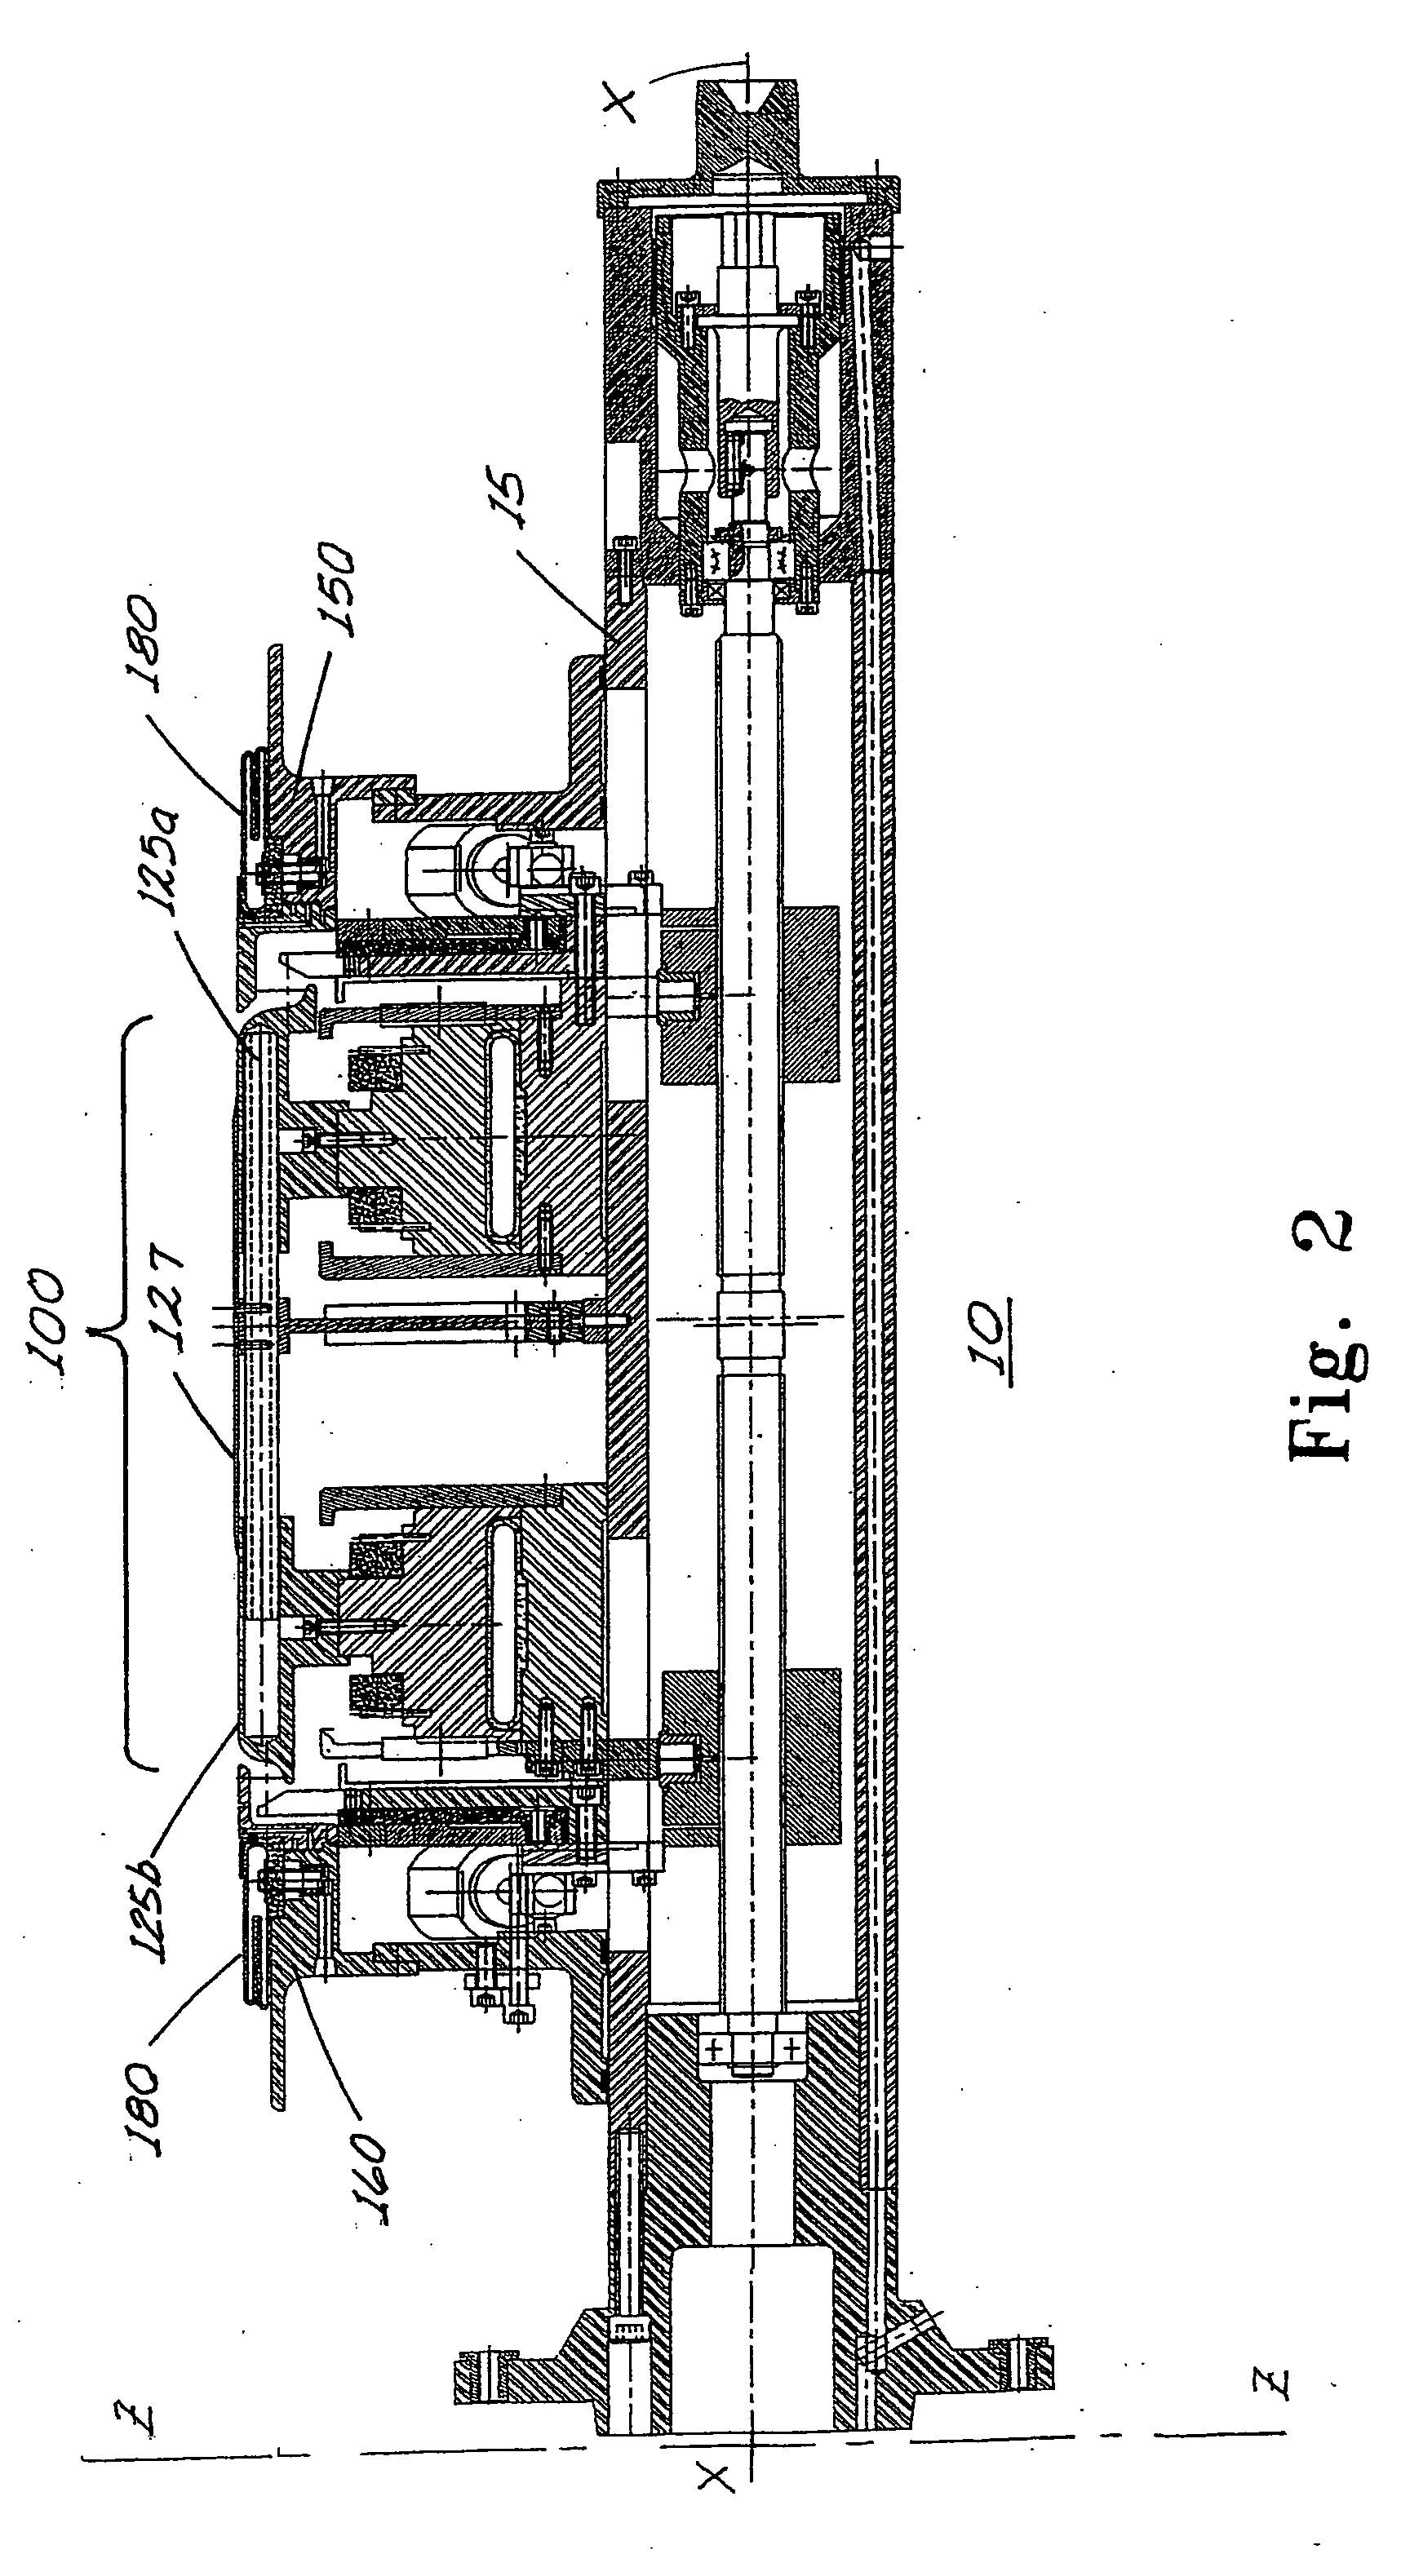 Tire building apparatus and assembly process